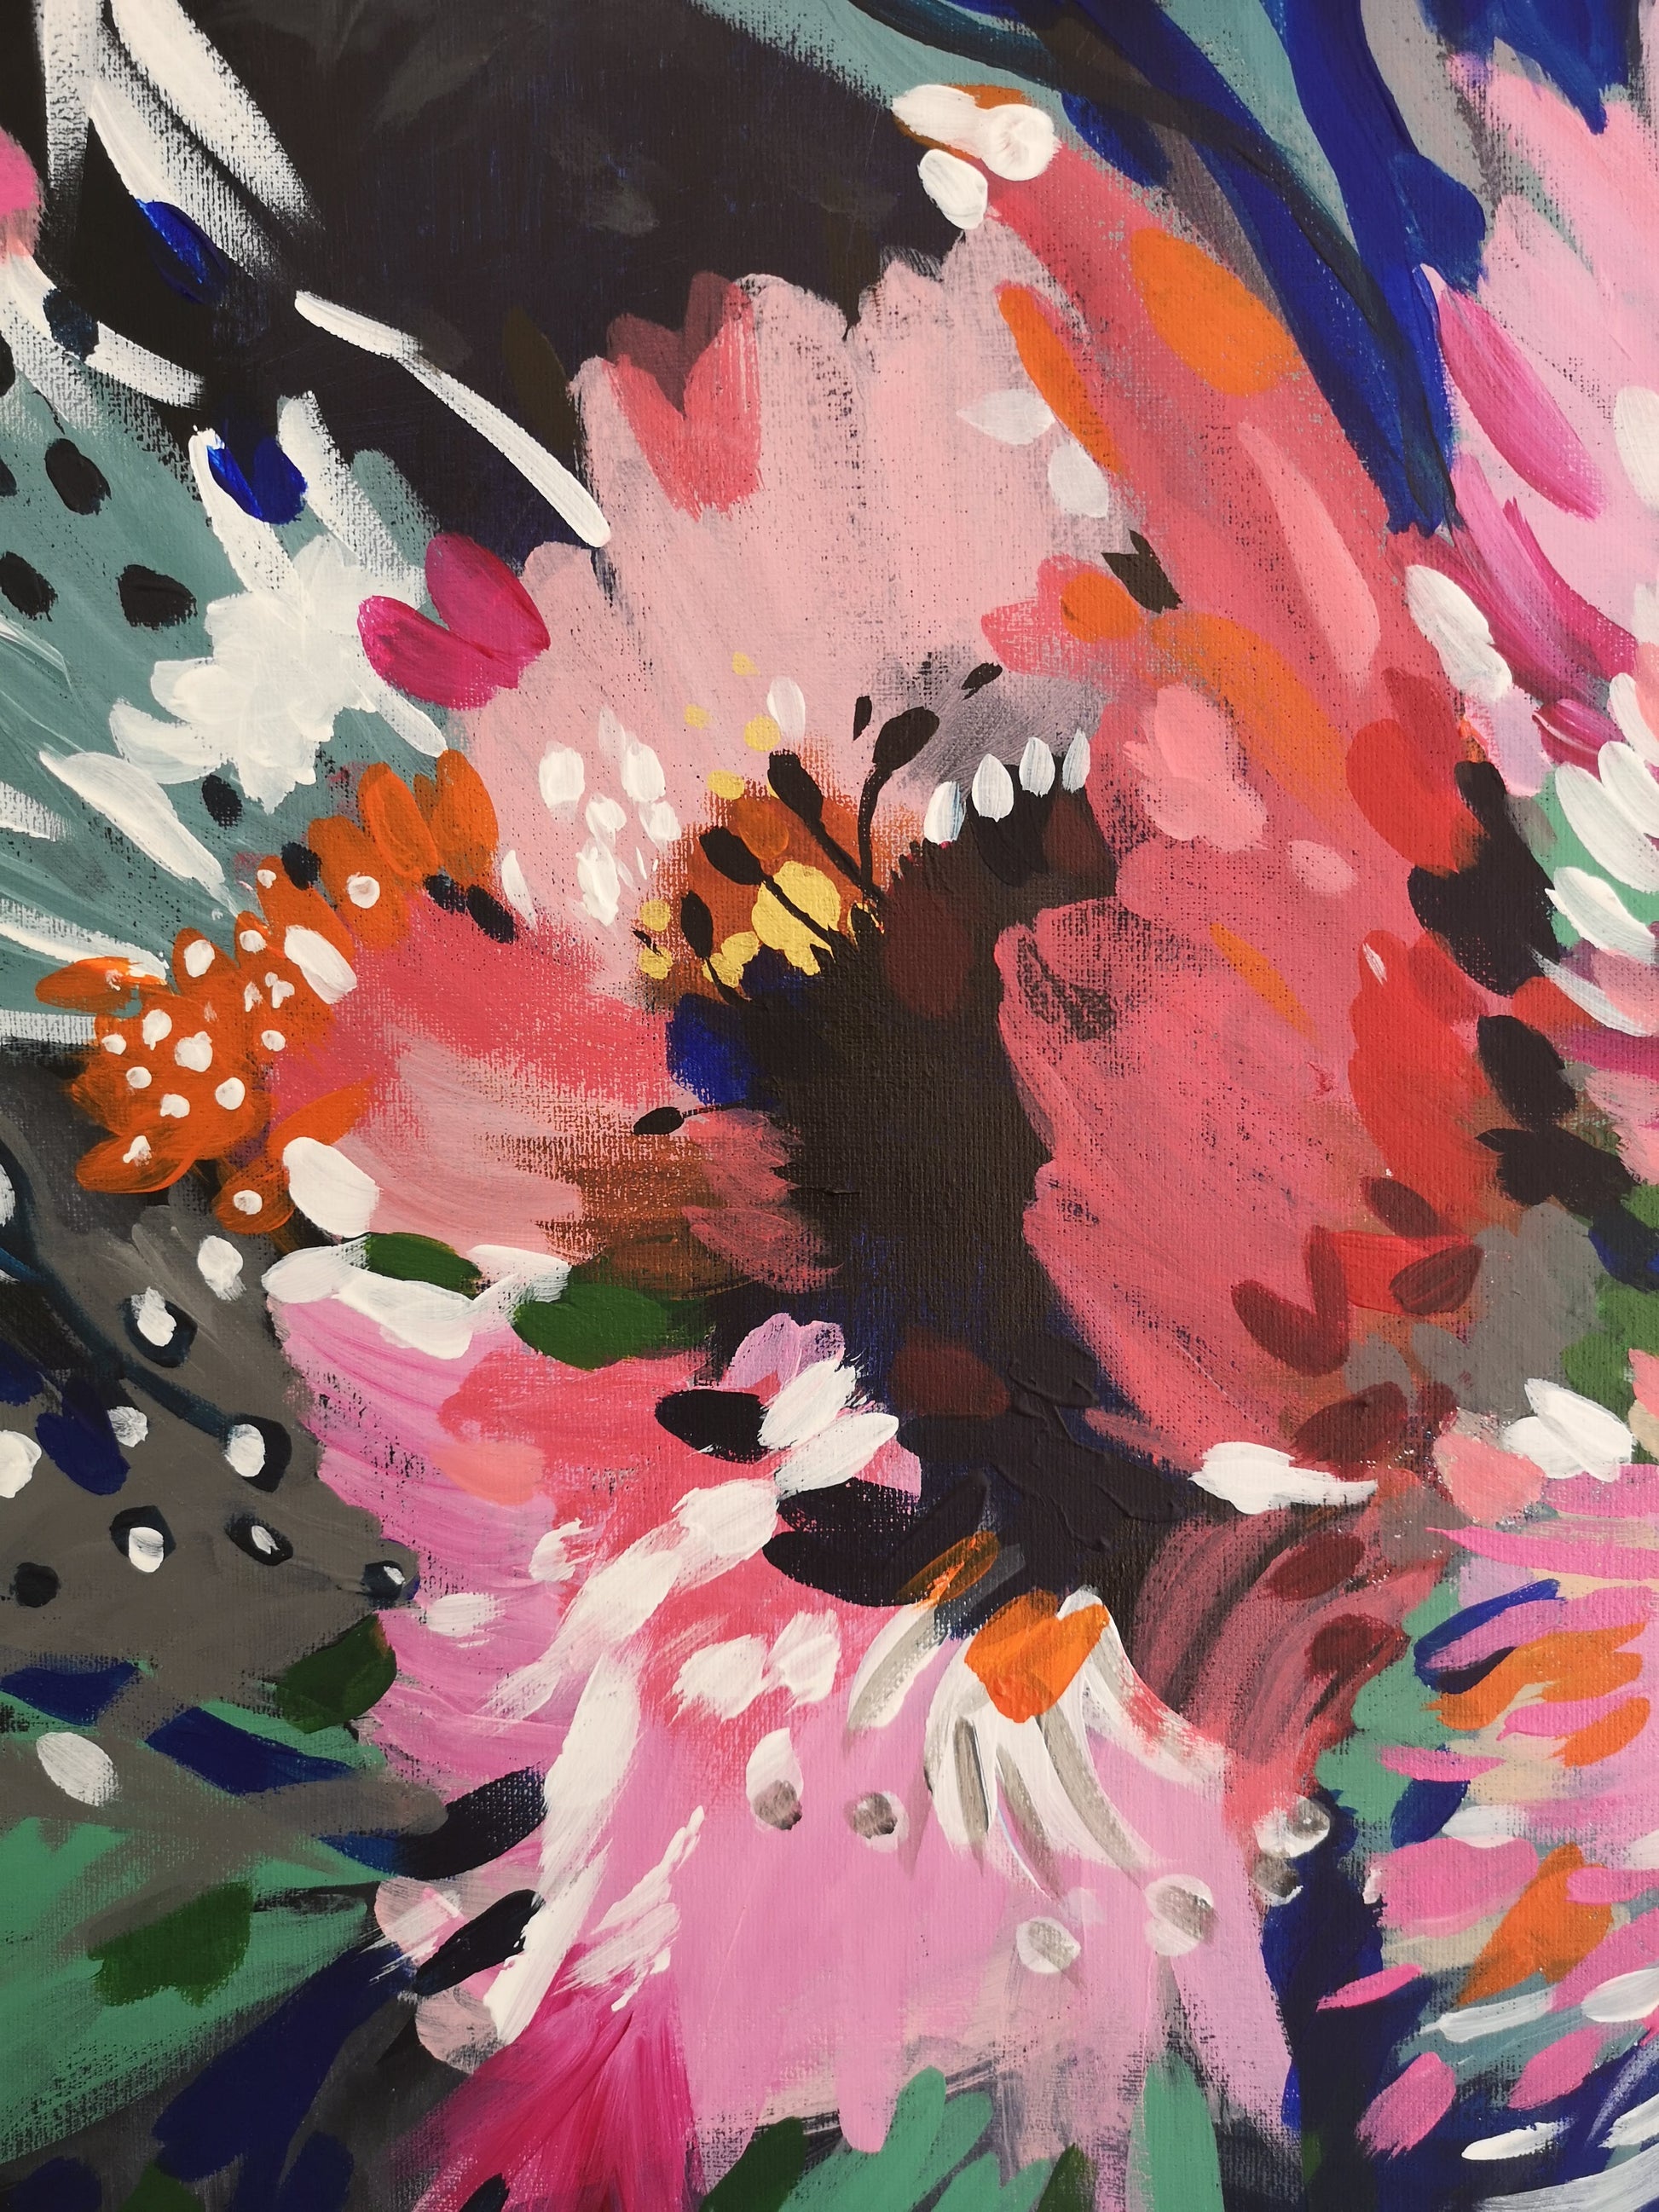 Close up of Abstract Floral painting by Judy Century Art showing brush strokes of large expressive pink flower with contrasting colours in expressive marks